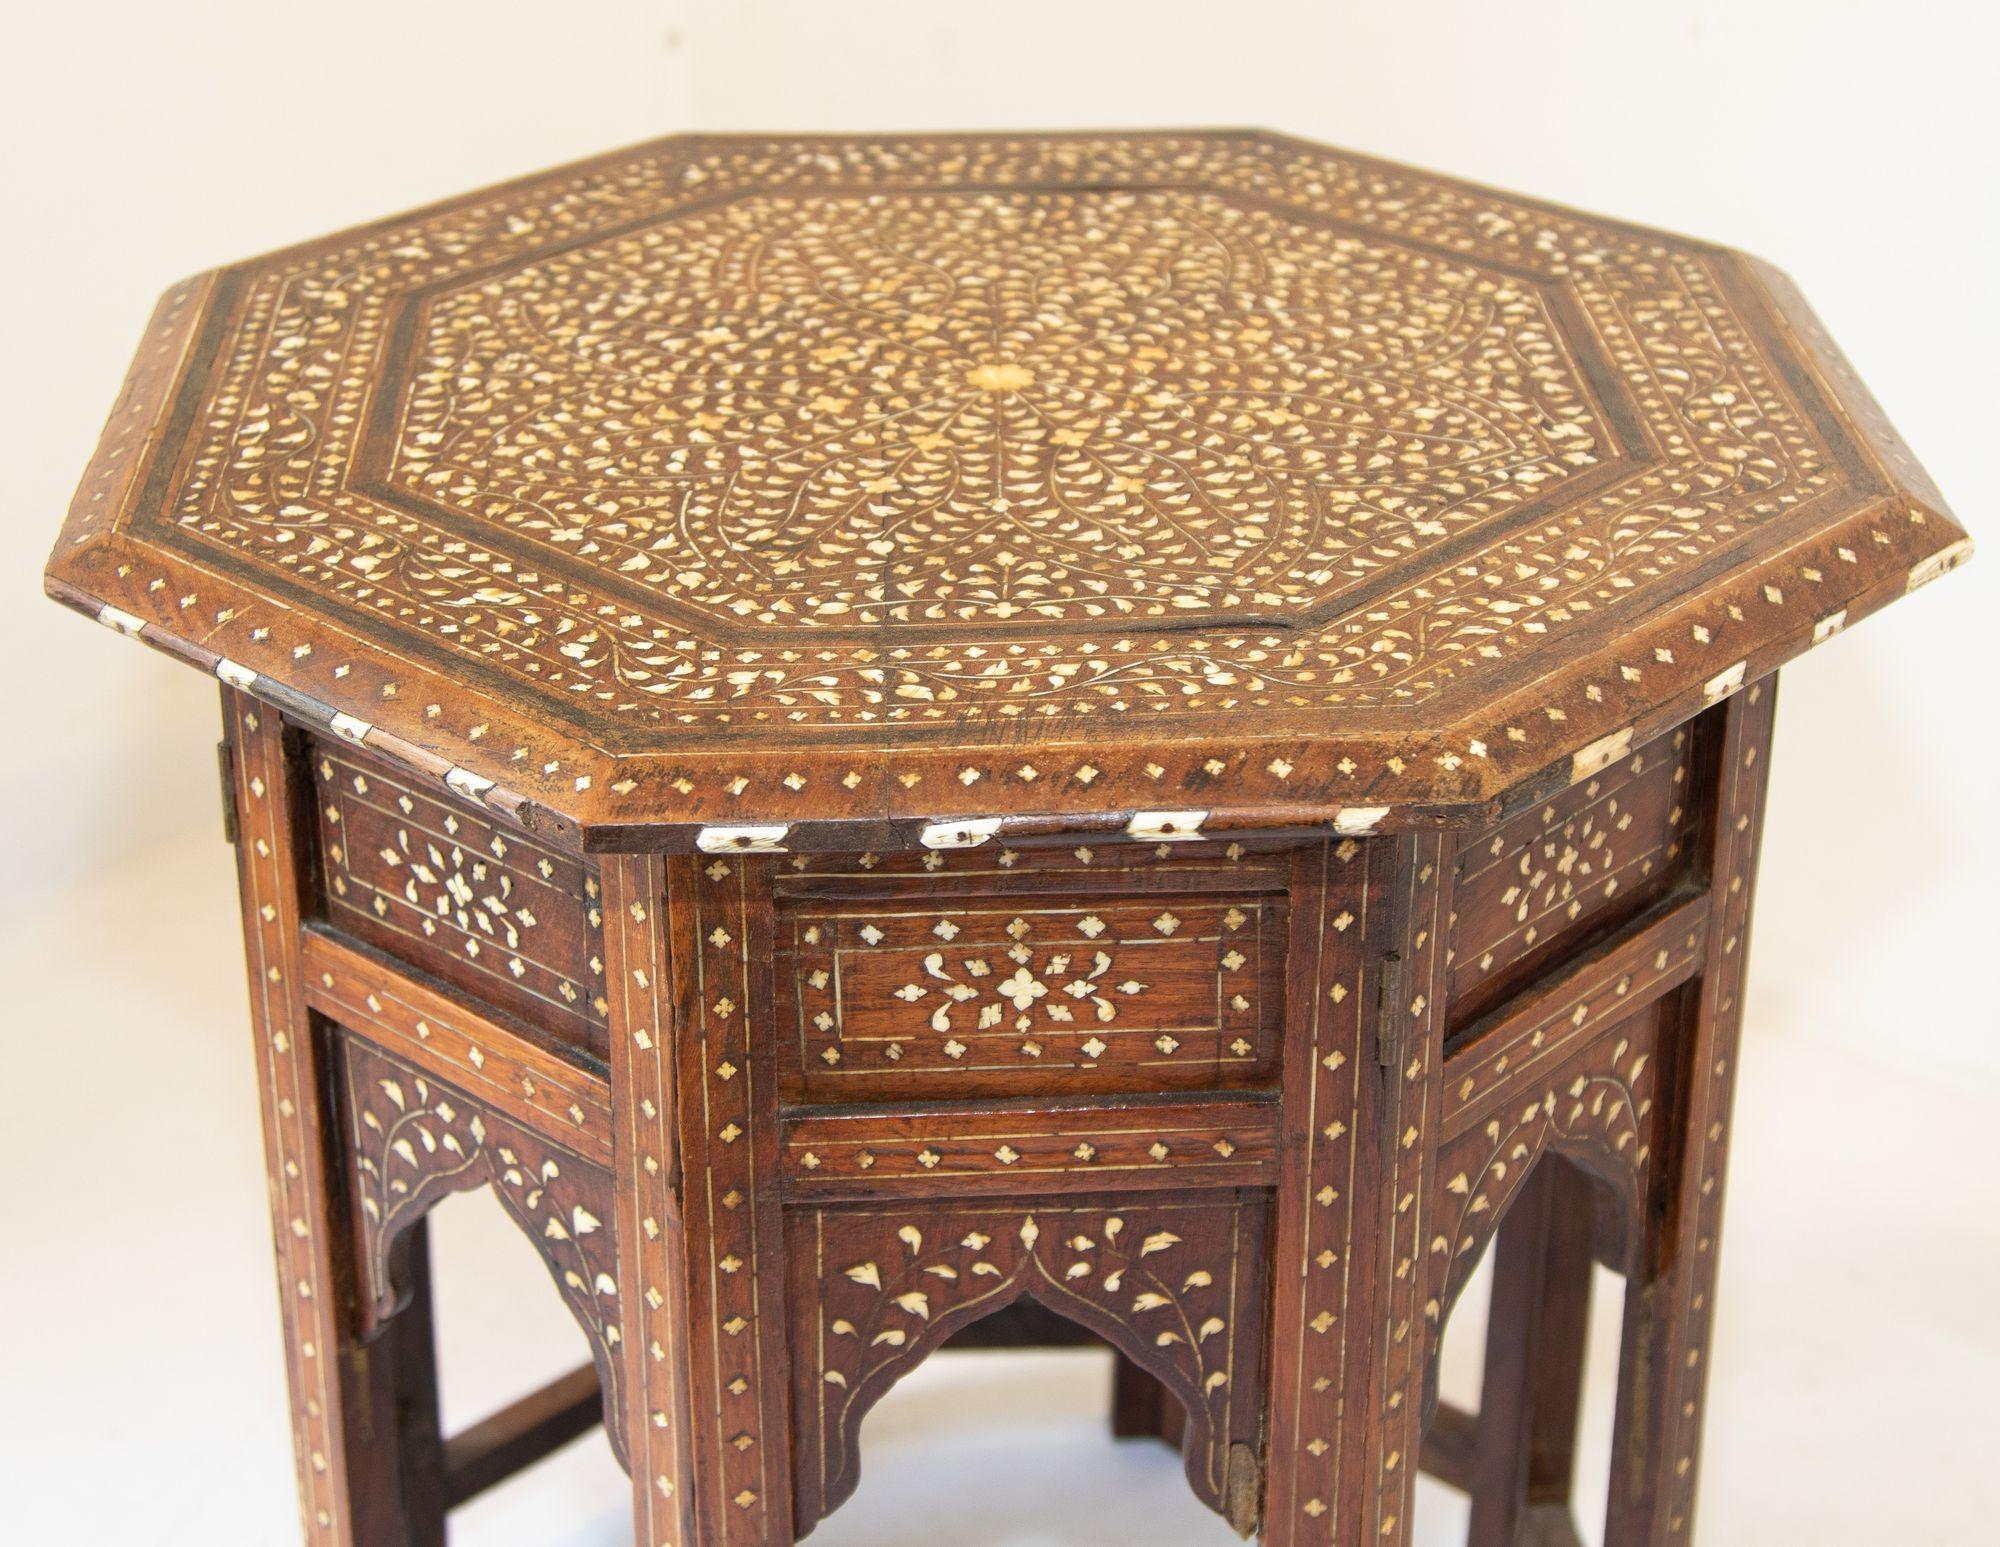 19th Century Antique Anglo-Indian Octagonal Mughal Moorish Table with Bone Inlay India